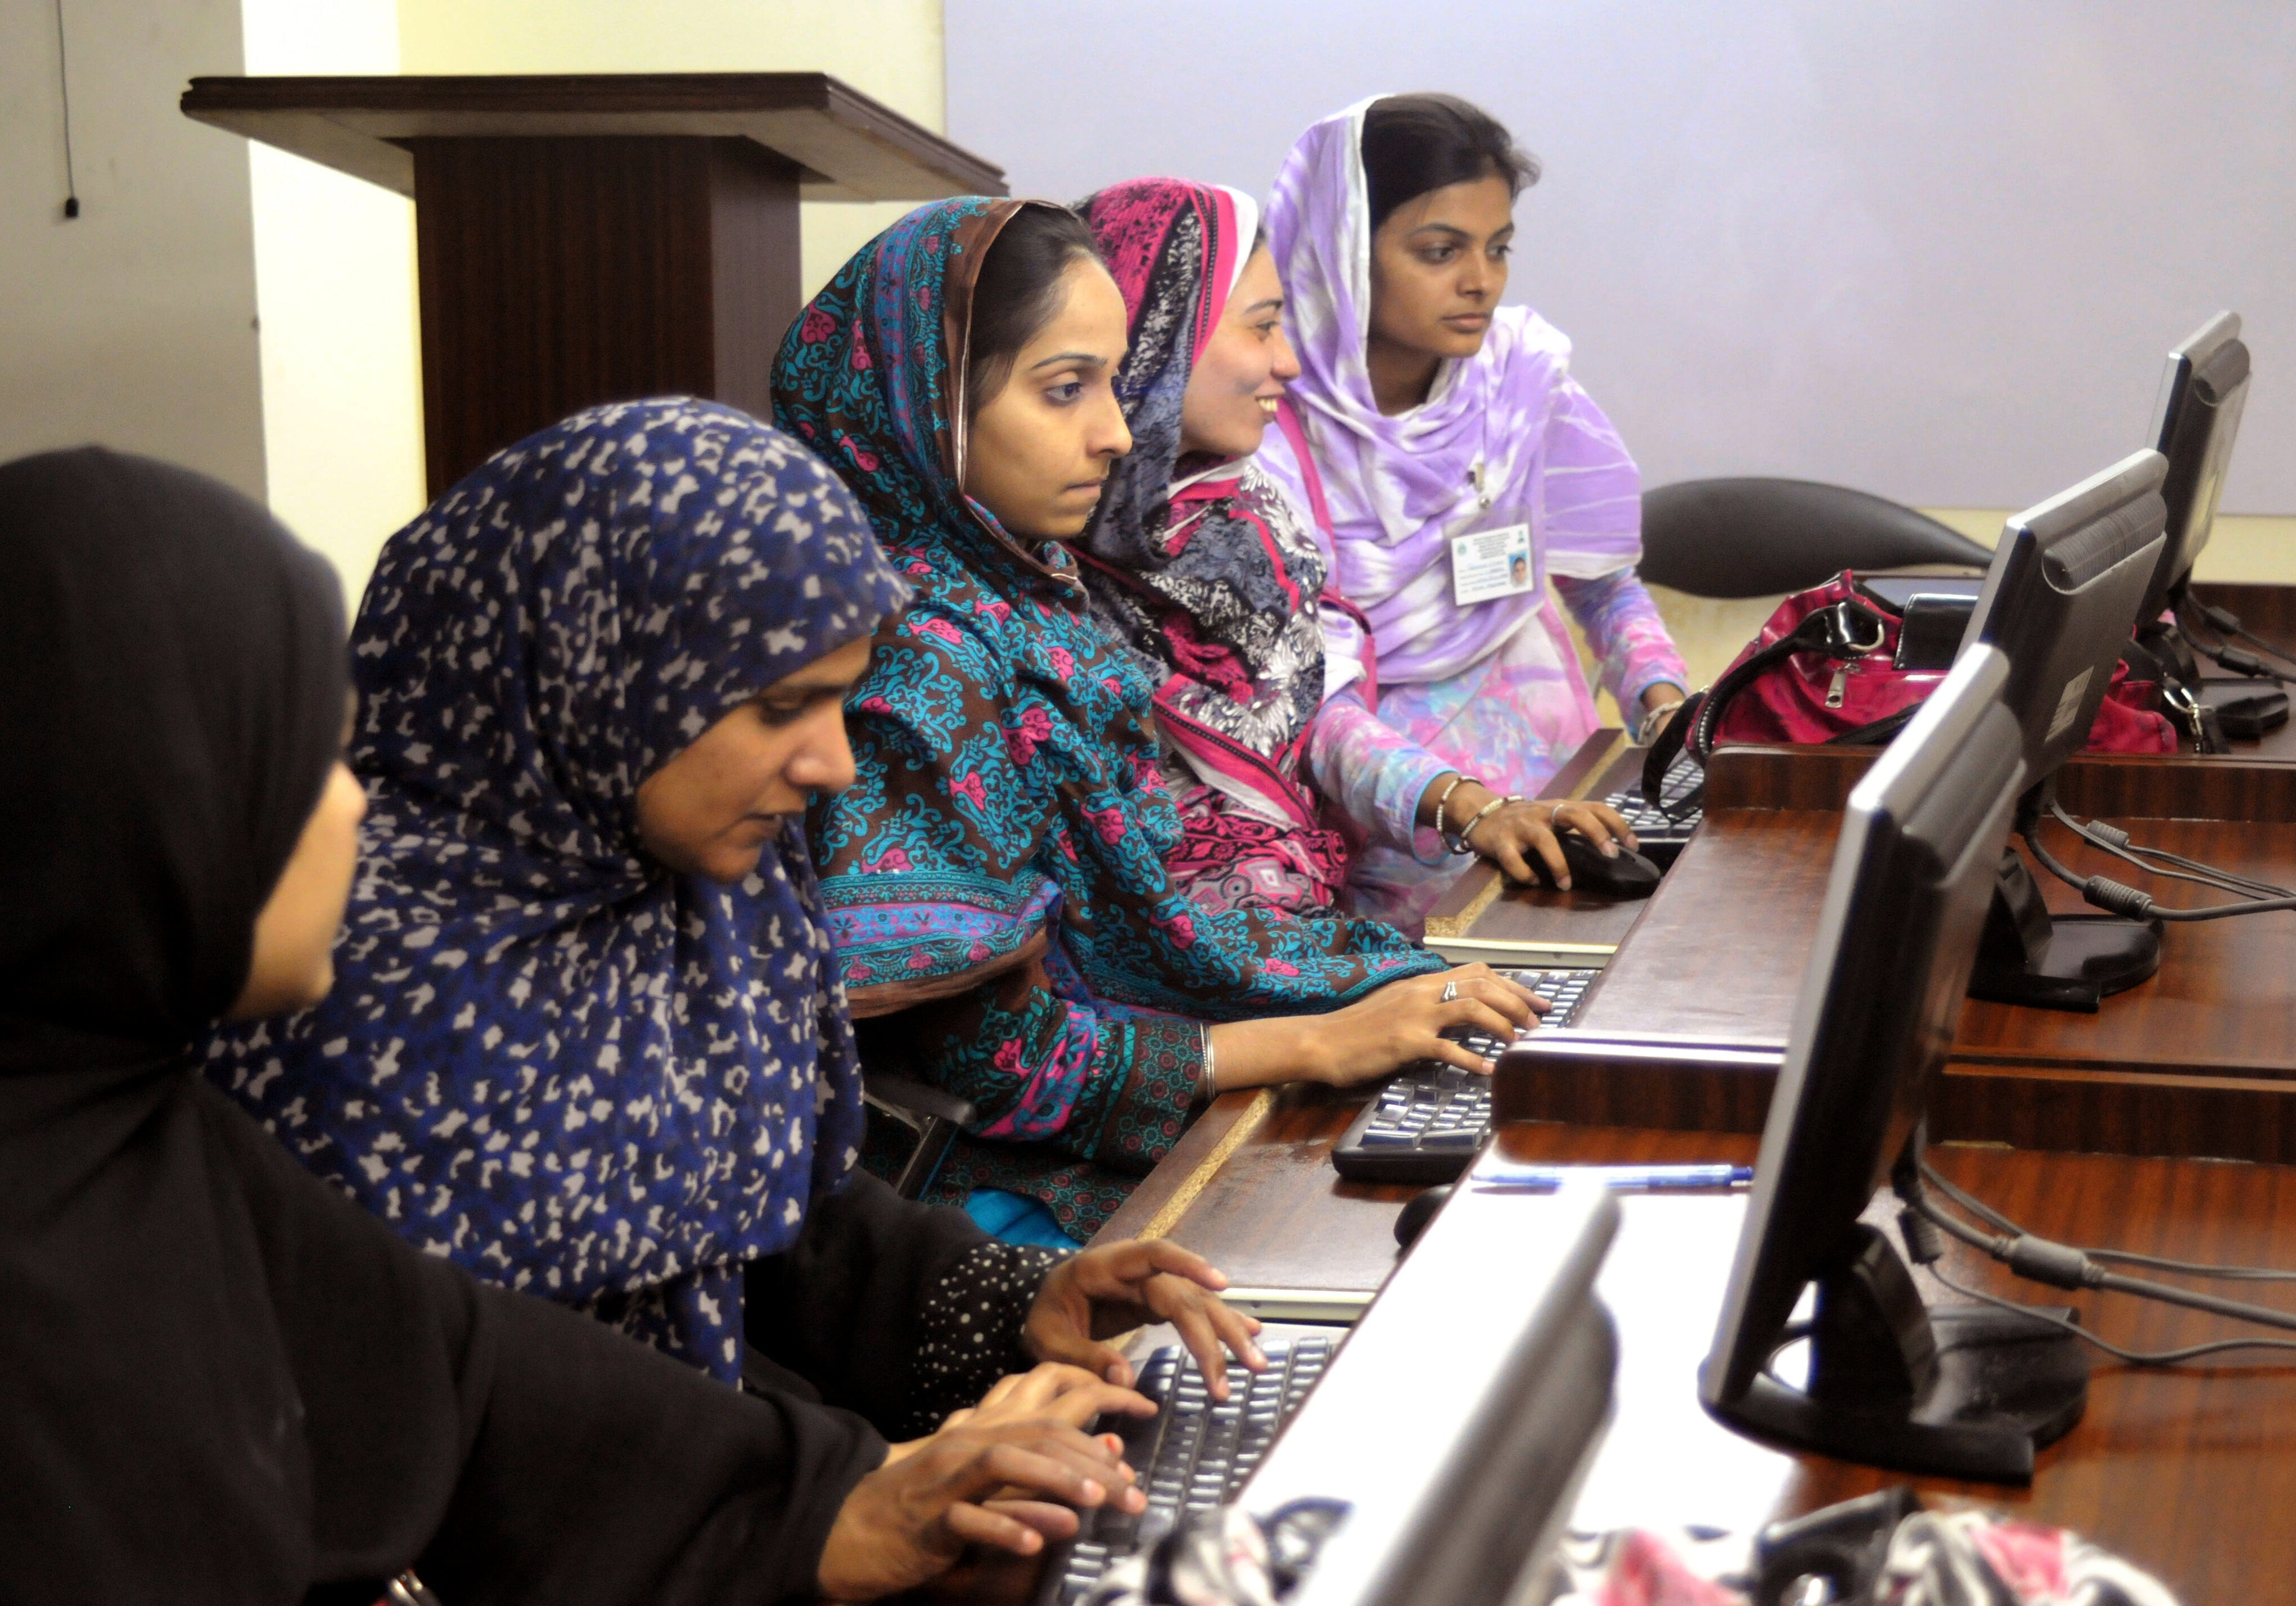 HYDERABAD: PAKISTAN: Students of the Computer Sciences at Khowaja Institute of Information Technology (KIIT) in Hyderabad, learn computing skills. The KIIT provides training and skill development programs to help graduates rise to the challenges. Photo: Visual News Associates / World Bank